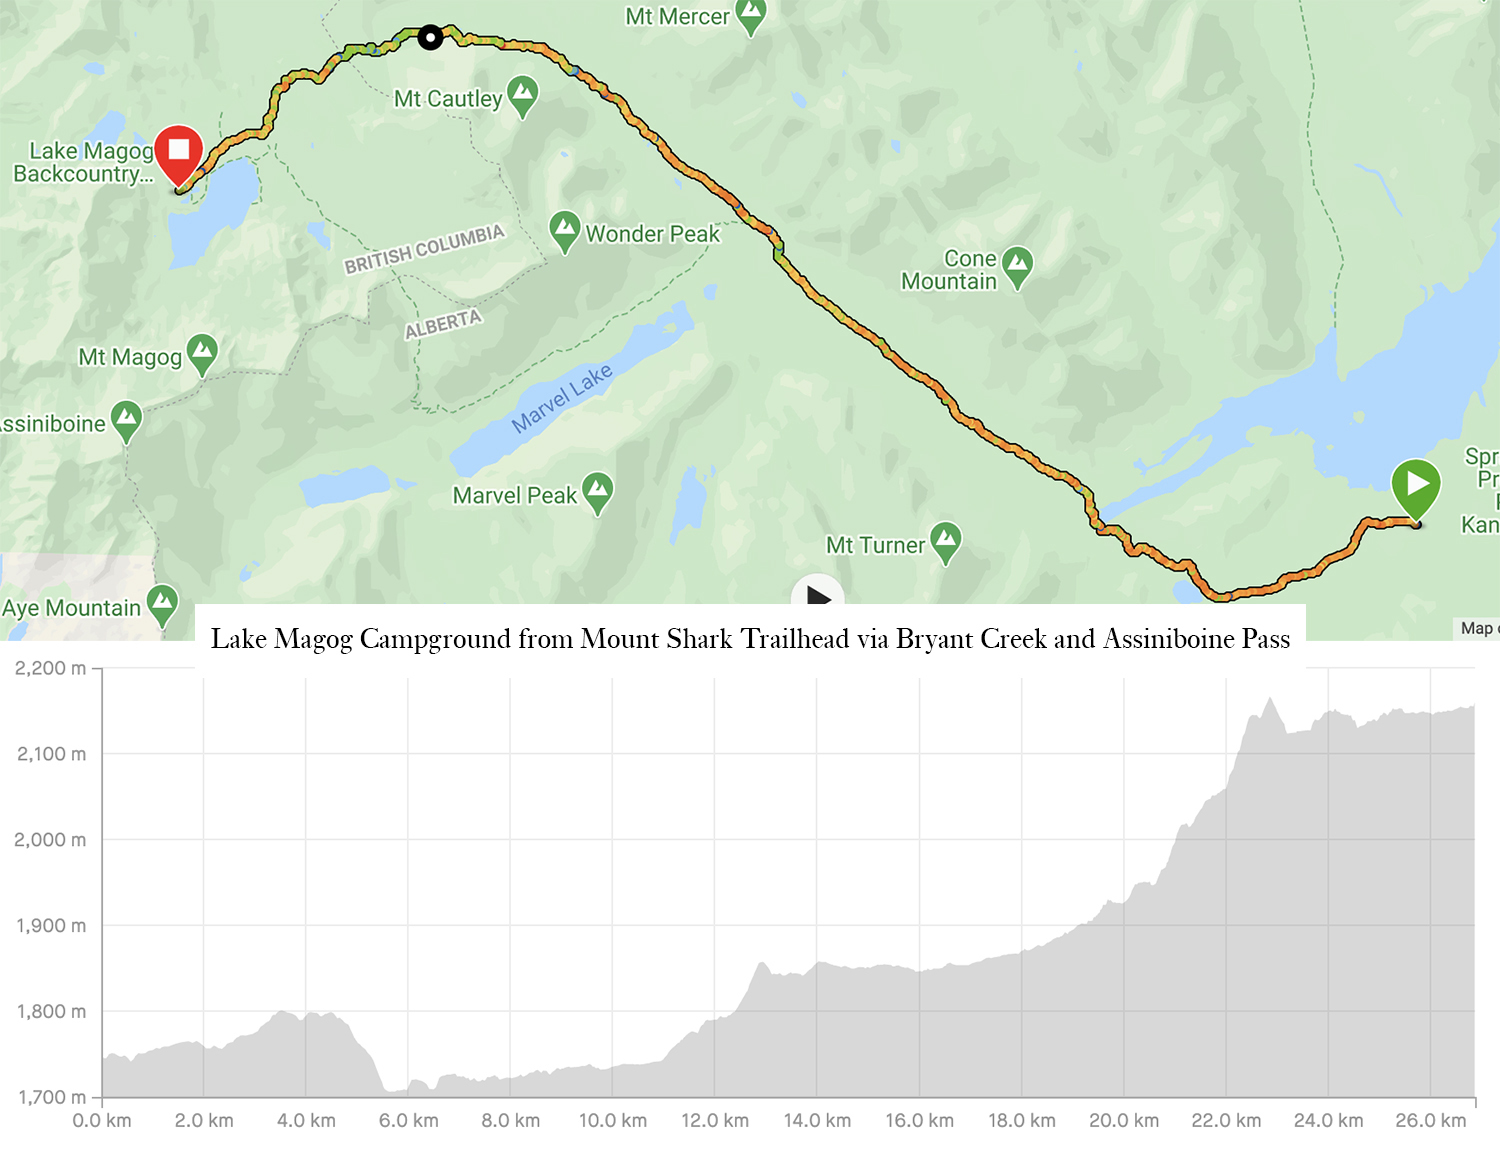 Map and elevation of backpacking route to Lake Magog Campground from Mount Shark Trailhead via Assiniboine Pass and Bryant Creek